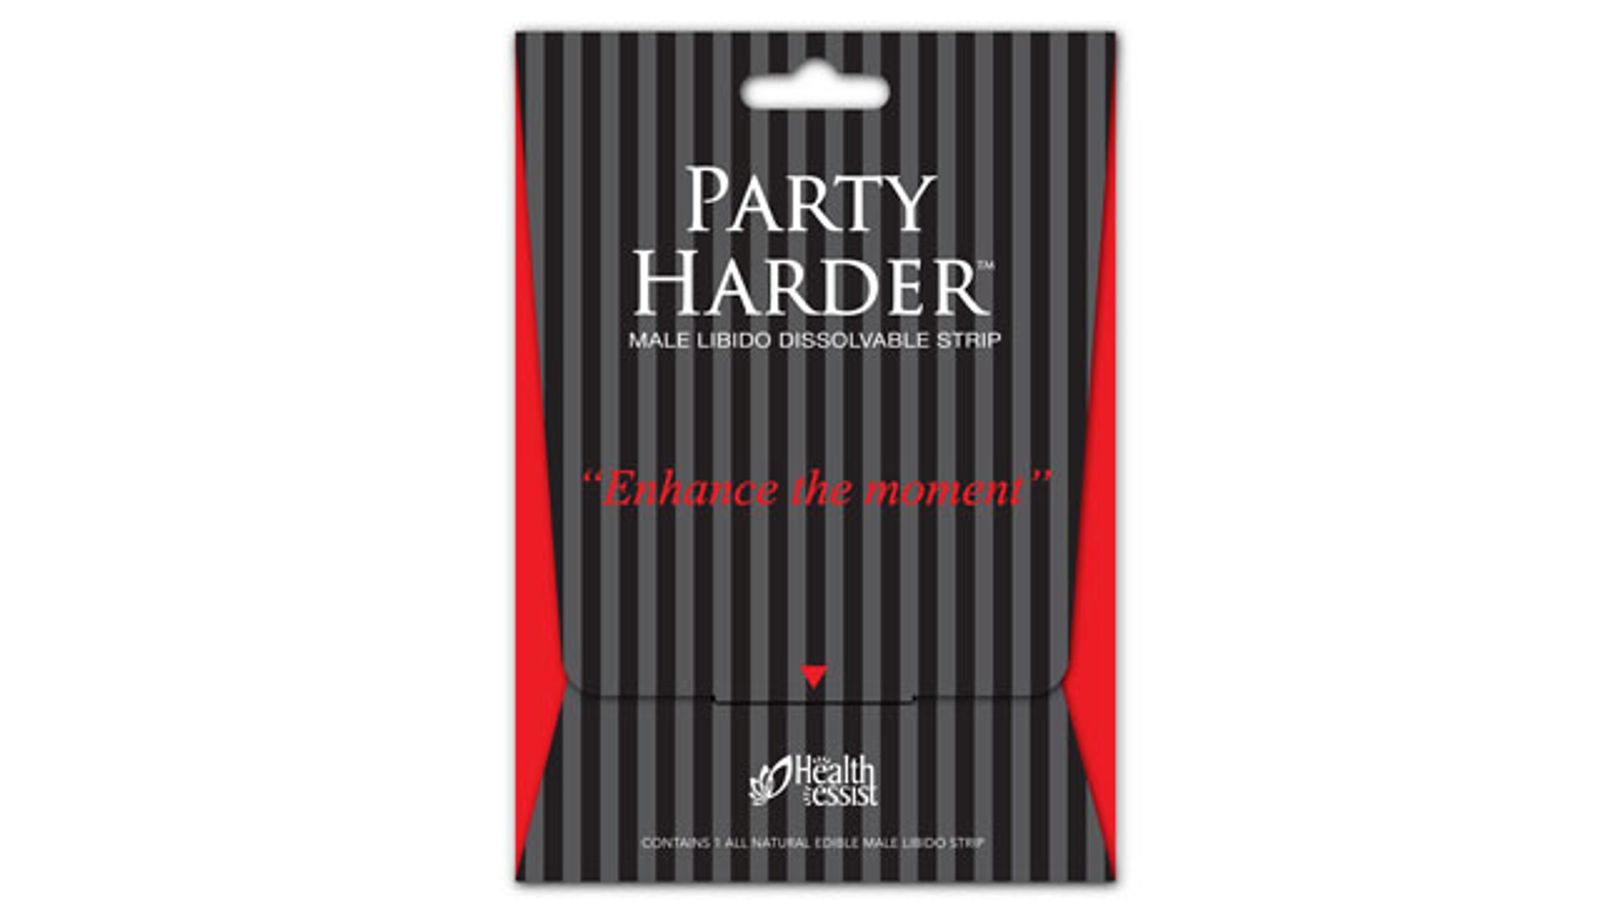 HEH Inc. Debuts Party Harder Strips